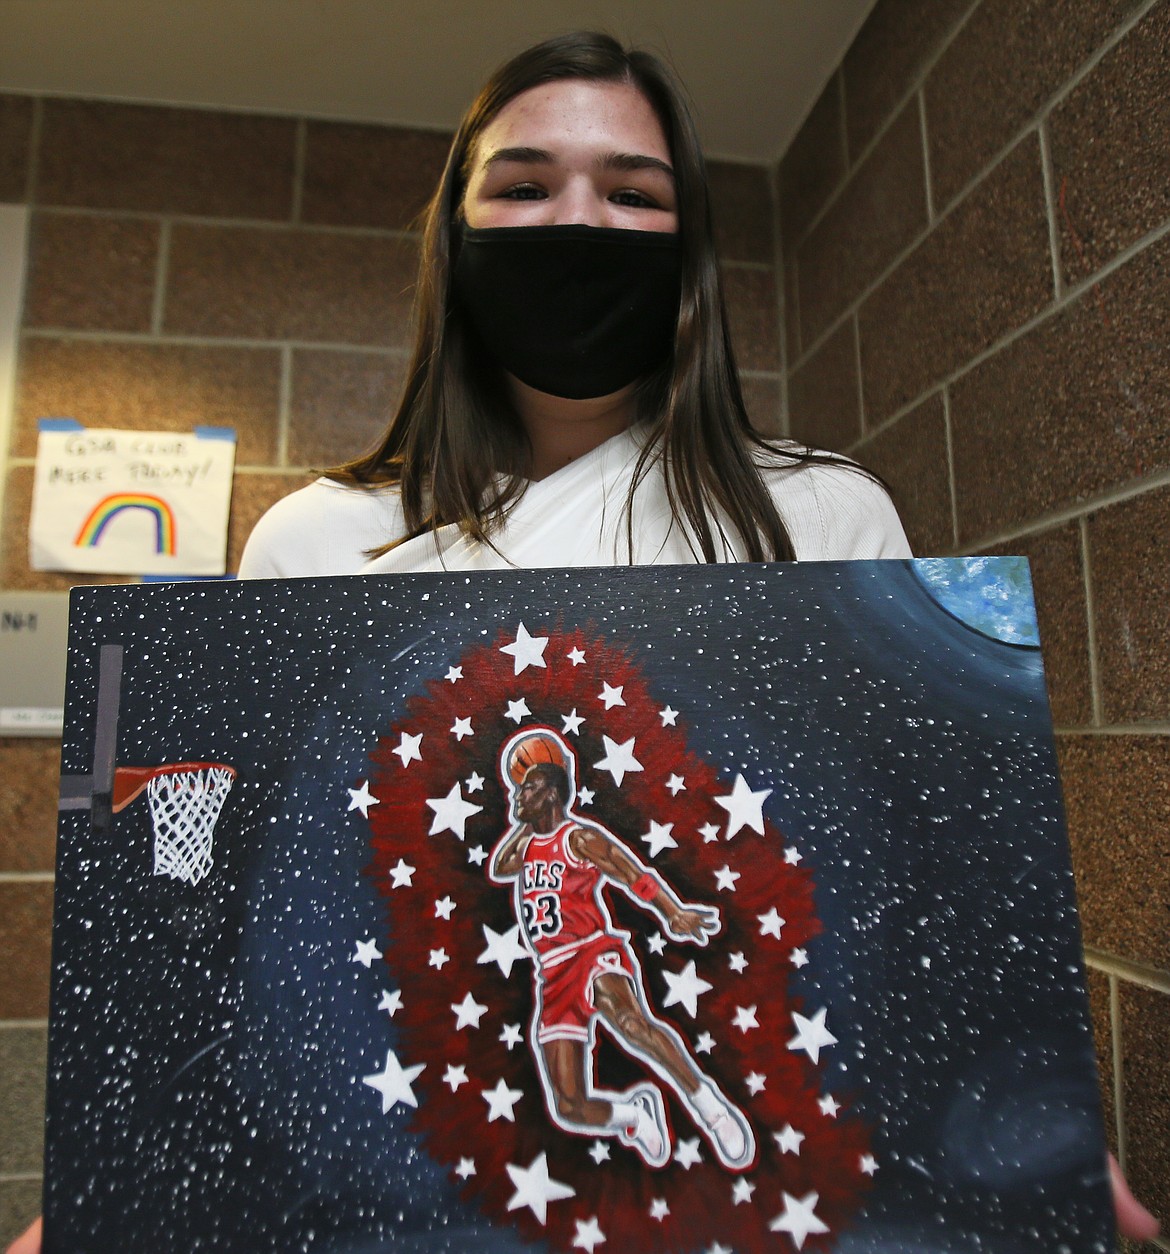 Brooklyn Rewers on Tuesday showcases her unique take on basketball hero Michael Jordan's epic dunks. The Lake City High School honors art student painted this as part of an independent project.